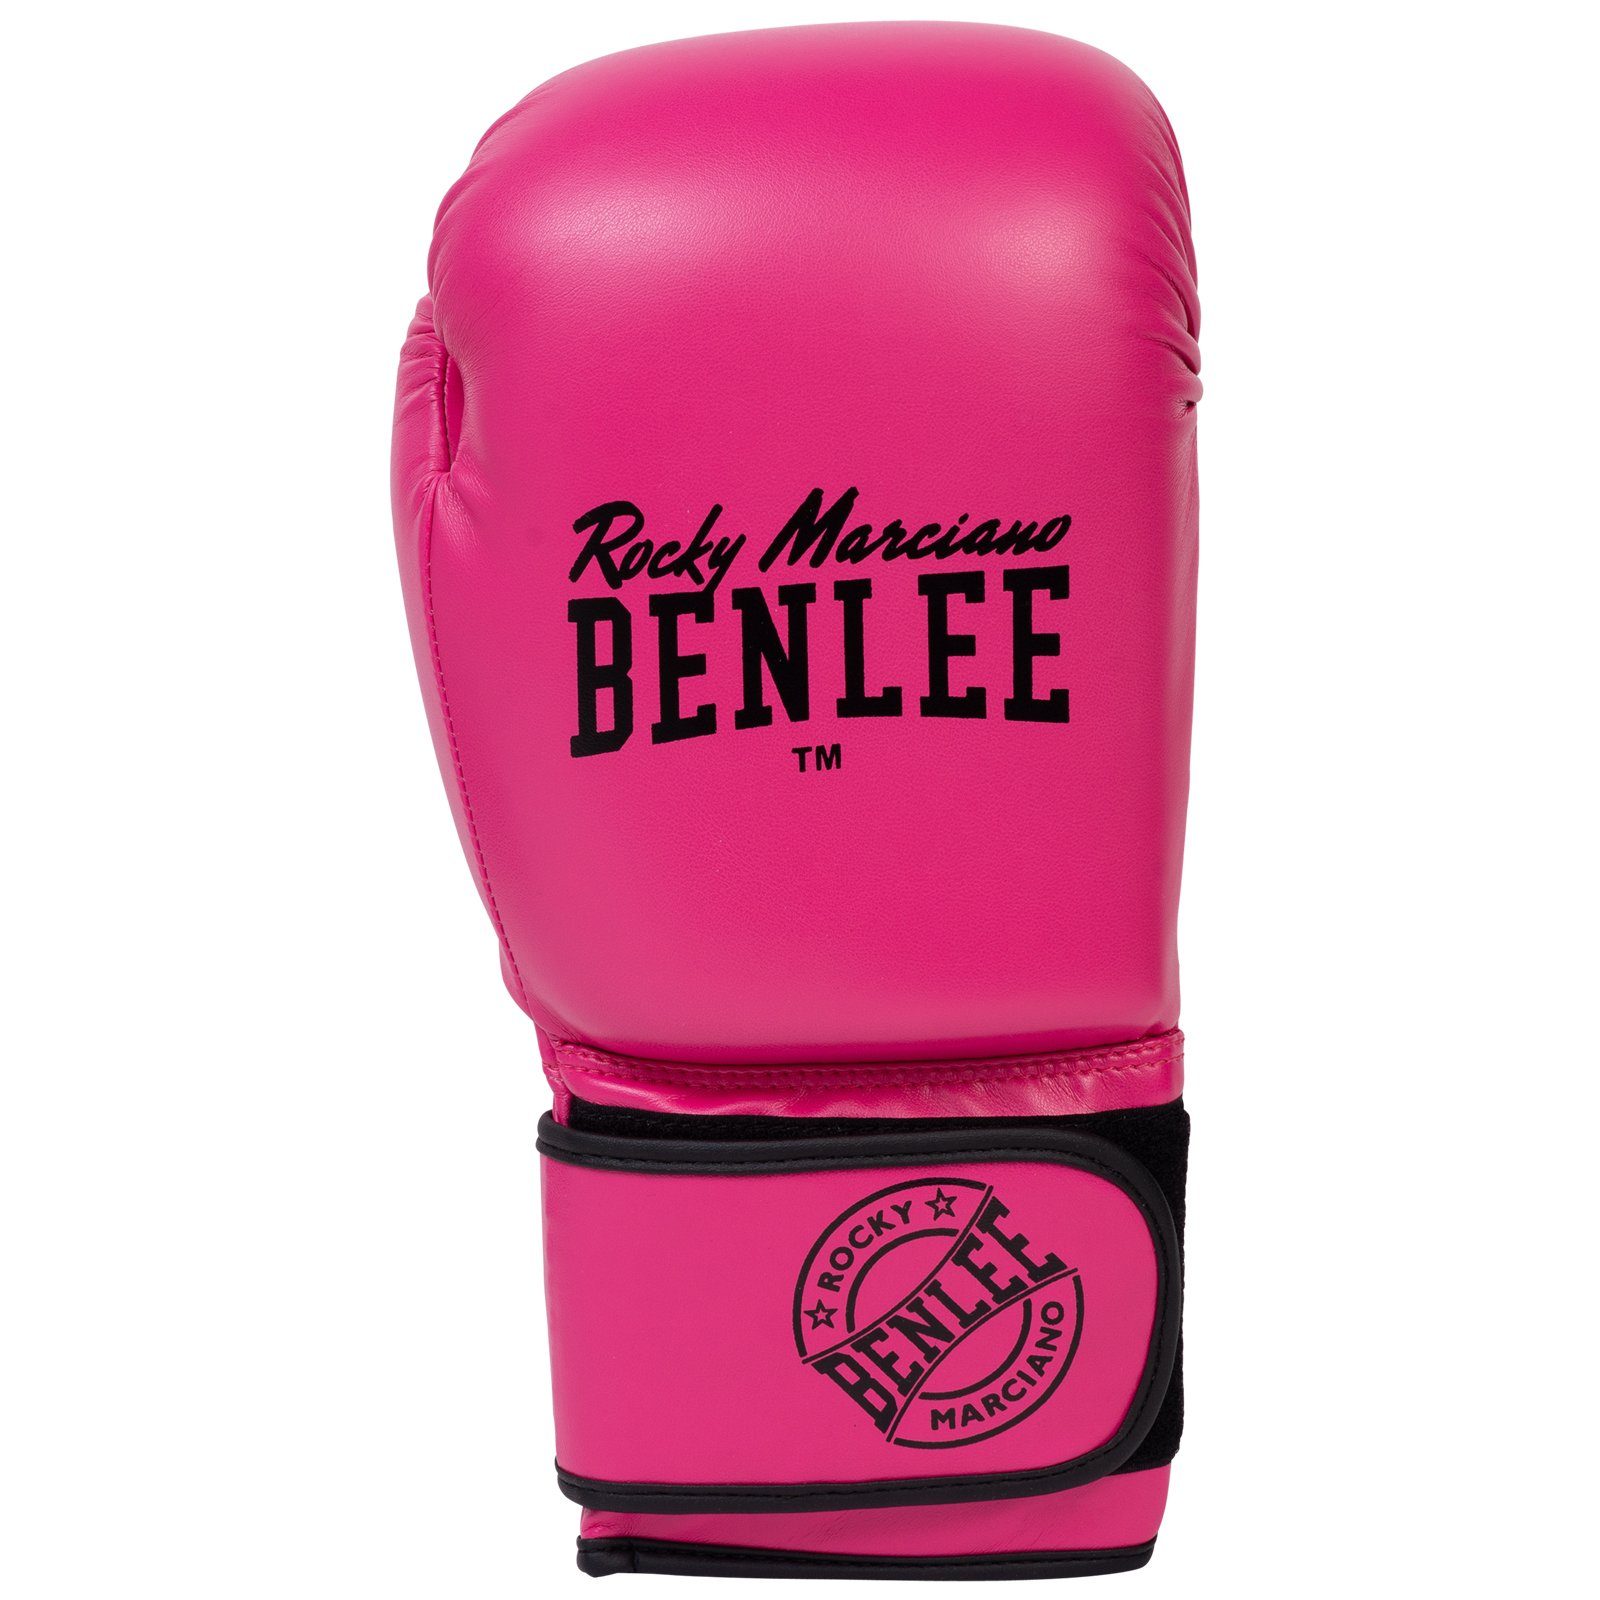 Benlee Rocky Marciano Boxhandschuhe CARLOS Pink